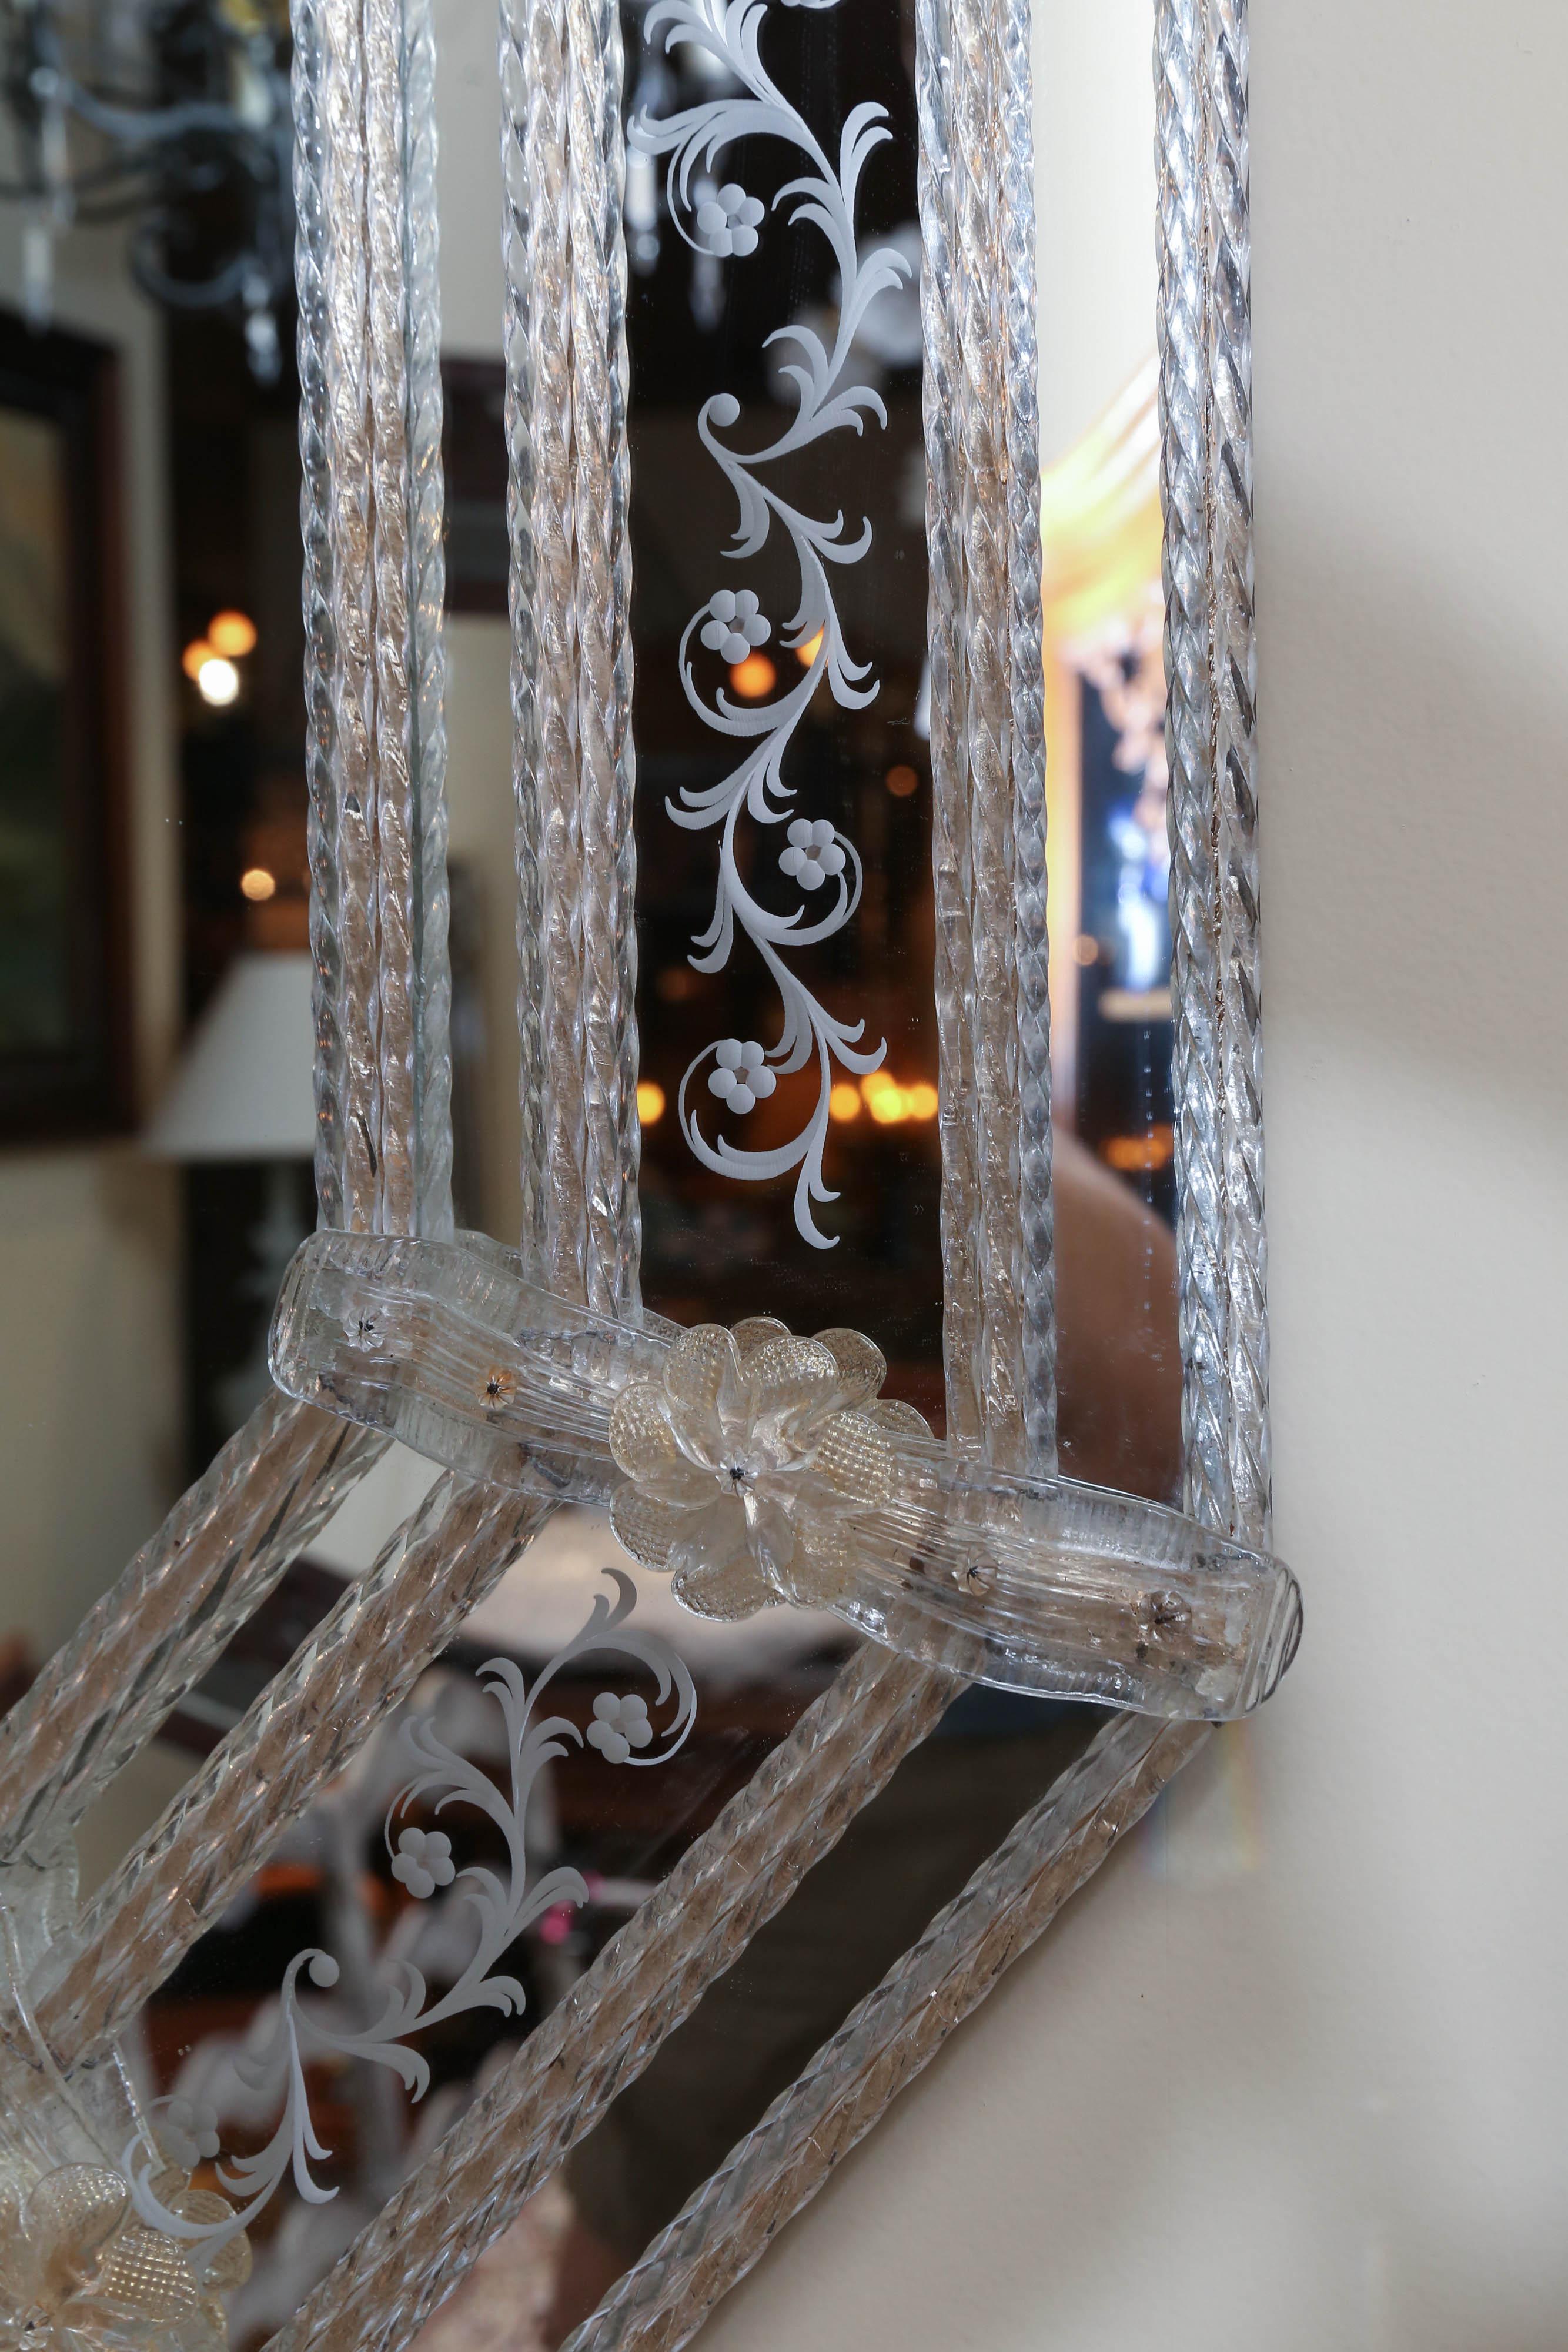 Venetian glass mirror in a lovely shape having floral
and scrolls decorating the edges.